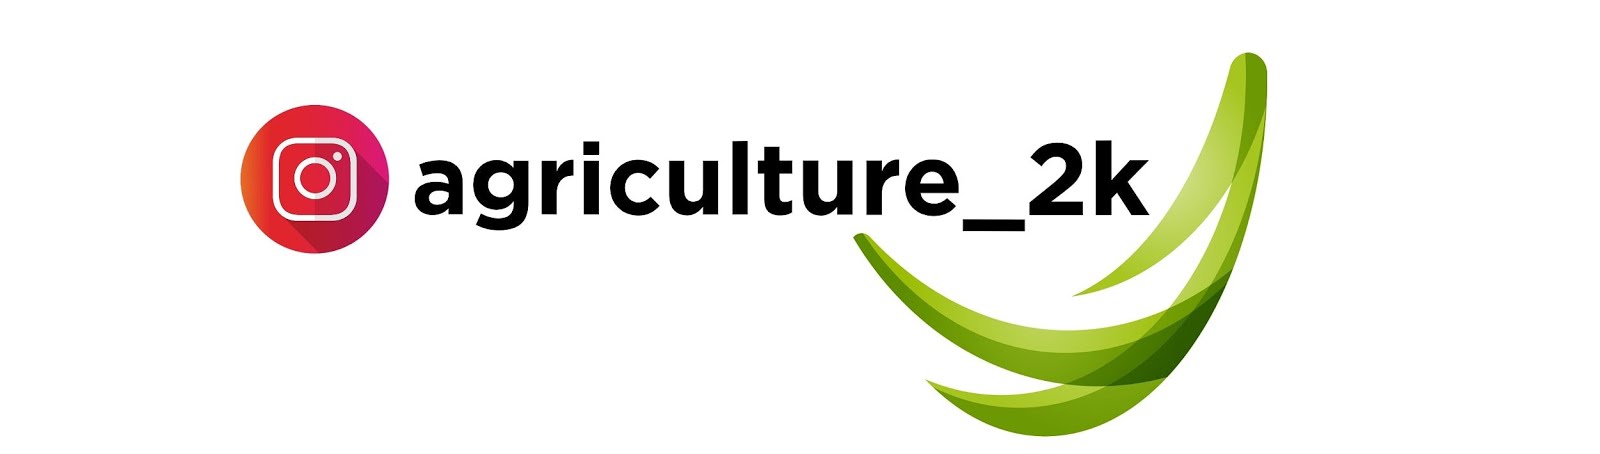 agriculture_2k